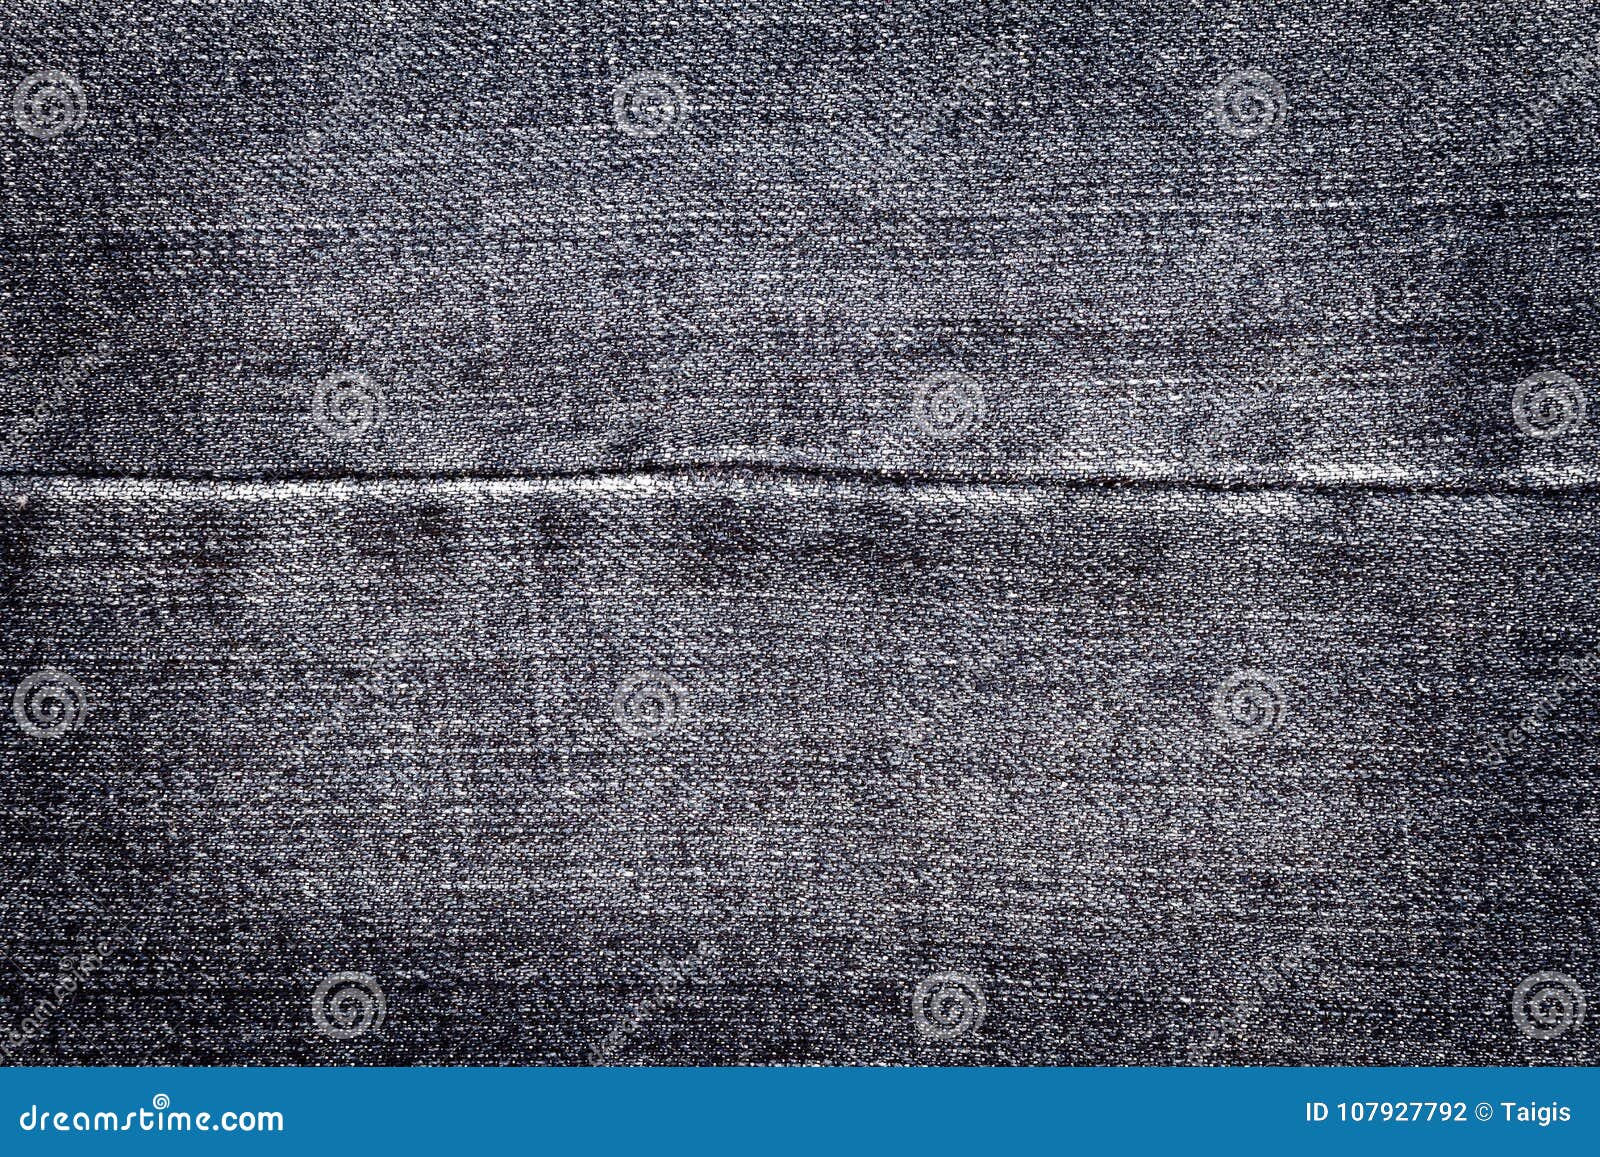 Black Jeans Texture stock photo. Image of casual, seam - 107927792